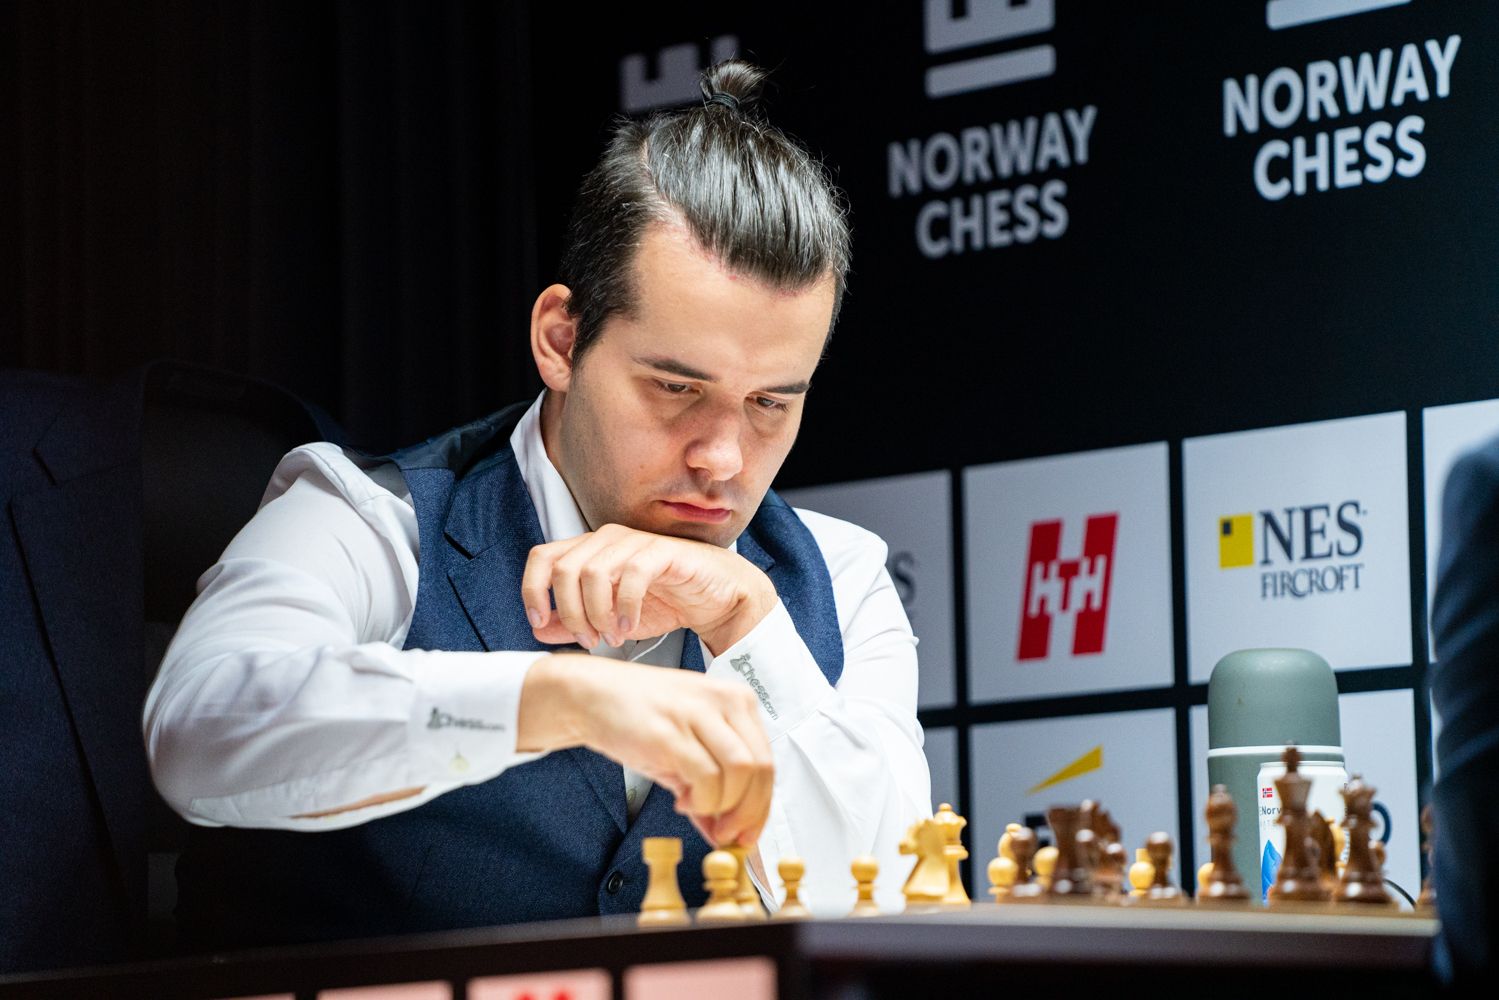 How Did Ian Nepomniachtchi become the world challenger against Carlsen?